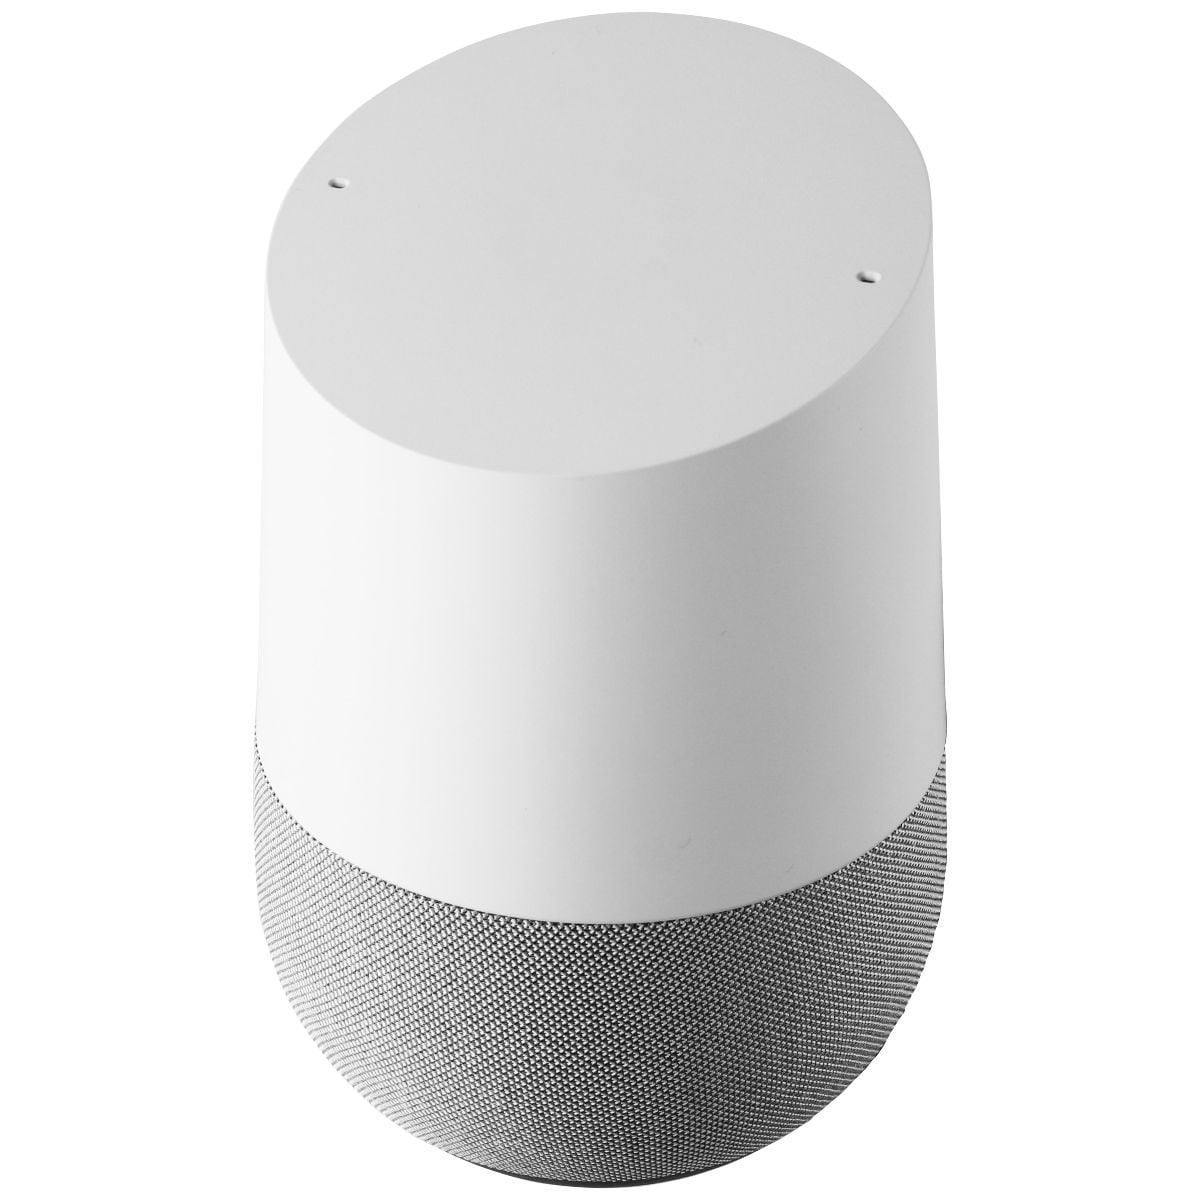 Google Home - Voice-Activated Smart Speaker (White)